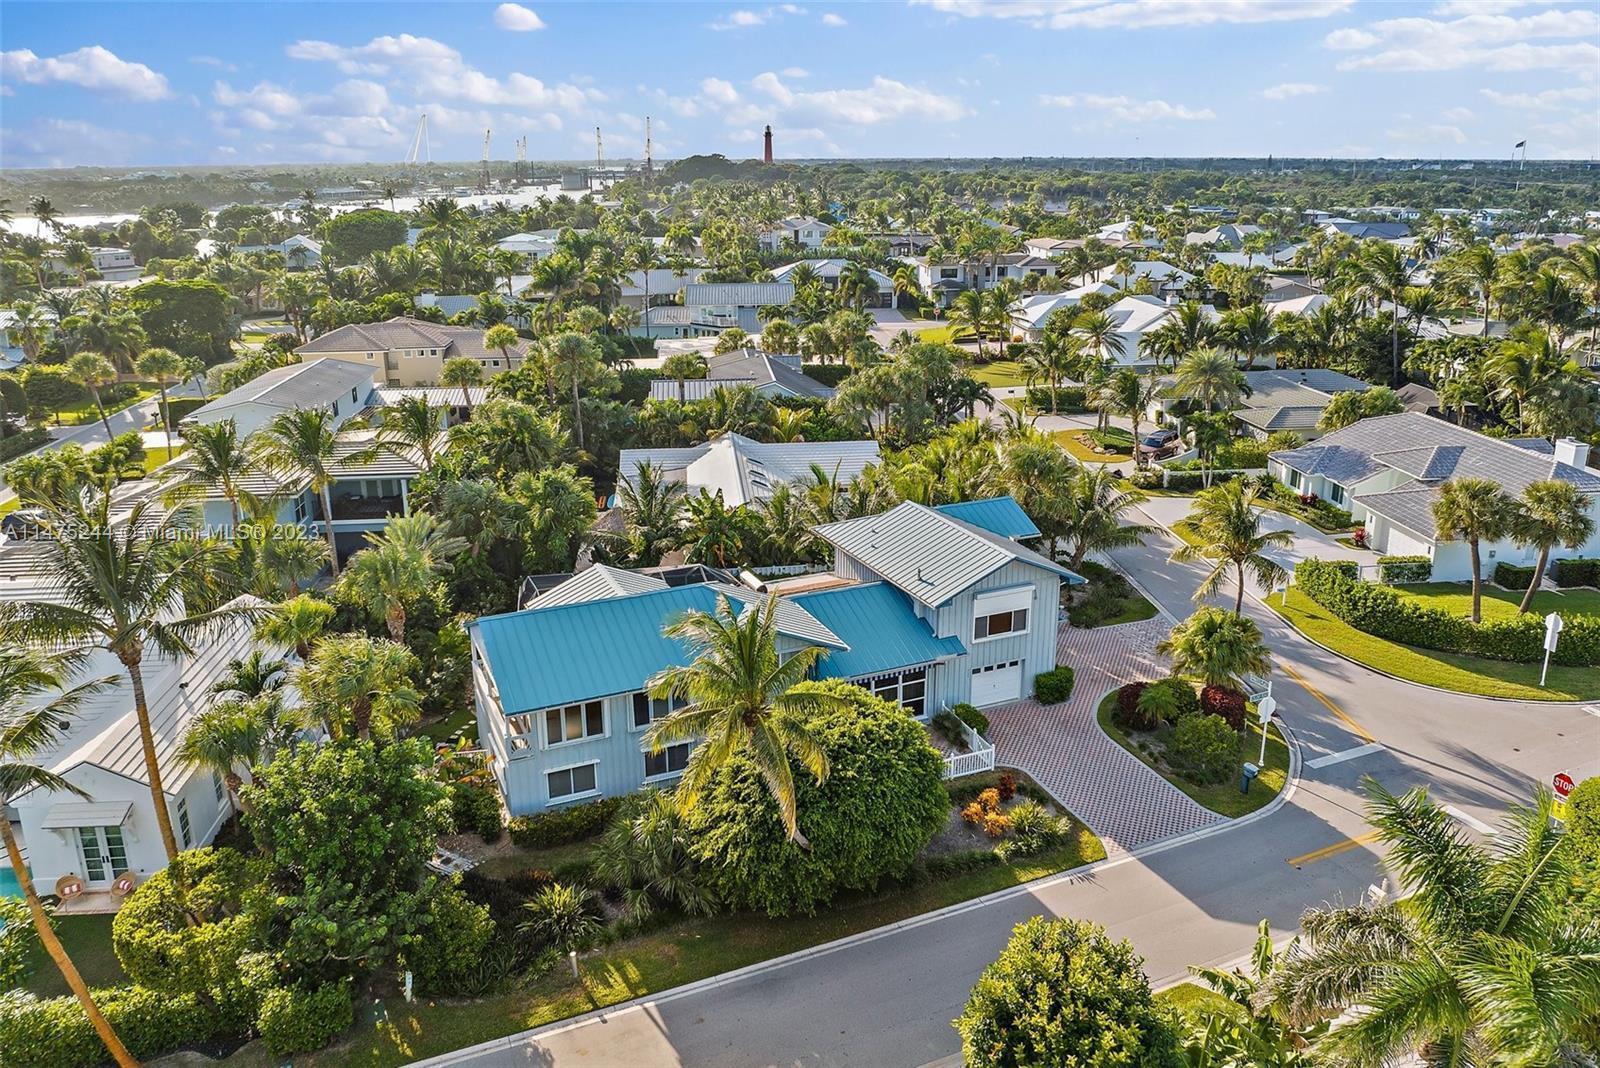 Perfect opportunity to create your dream home steps from the private beach on this corner lot nestled in the highly sought after ocean front community of Jupiter Inlet Colony. Call for your private viewing